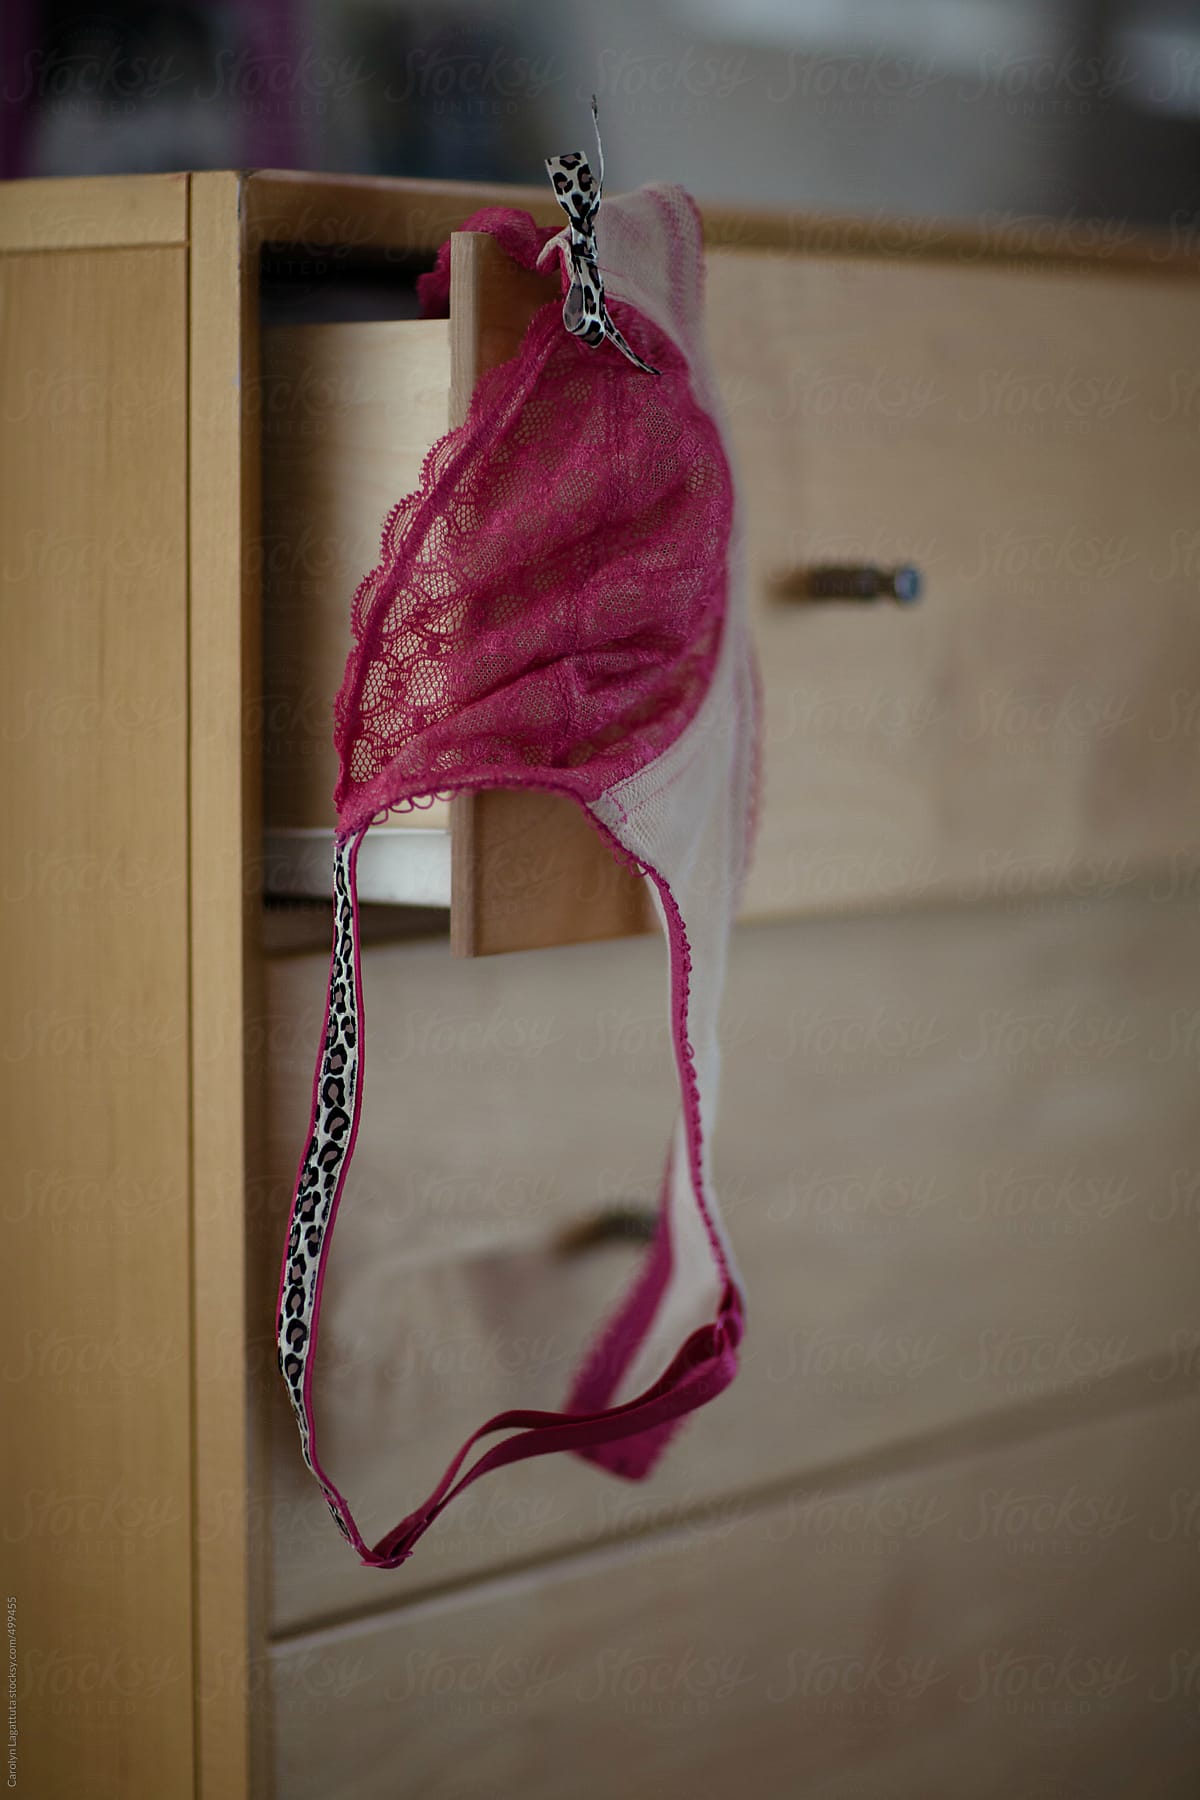 Pink Lace Bra Hanging Out Of The Top Drawer Of The Dresser by Stocksy  Contributor Carolyn Lagattuta - Stocksy